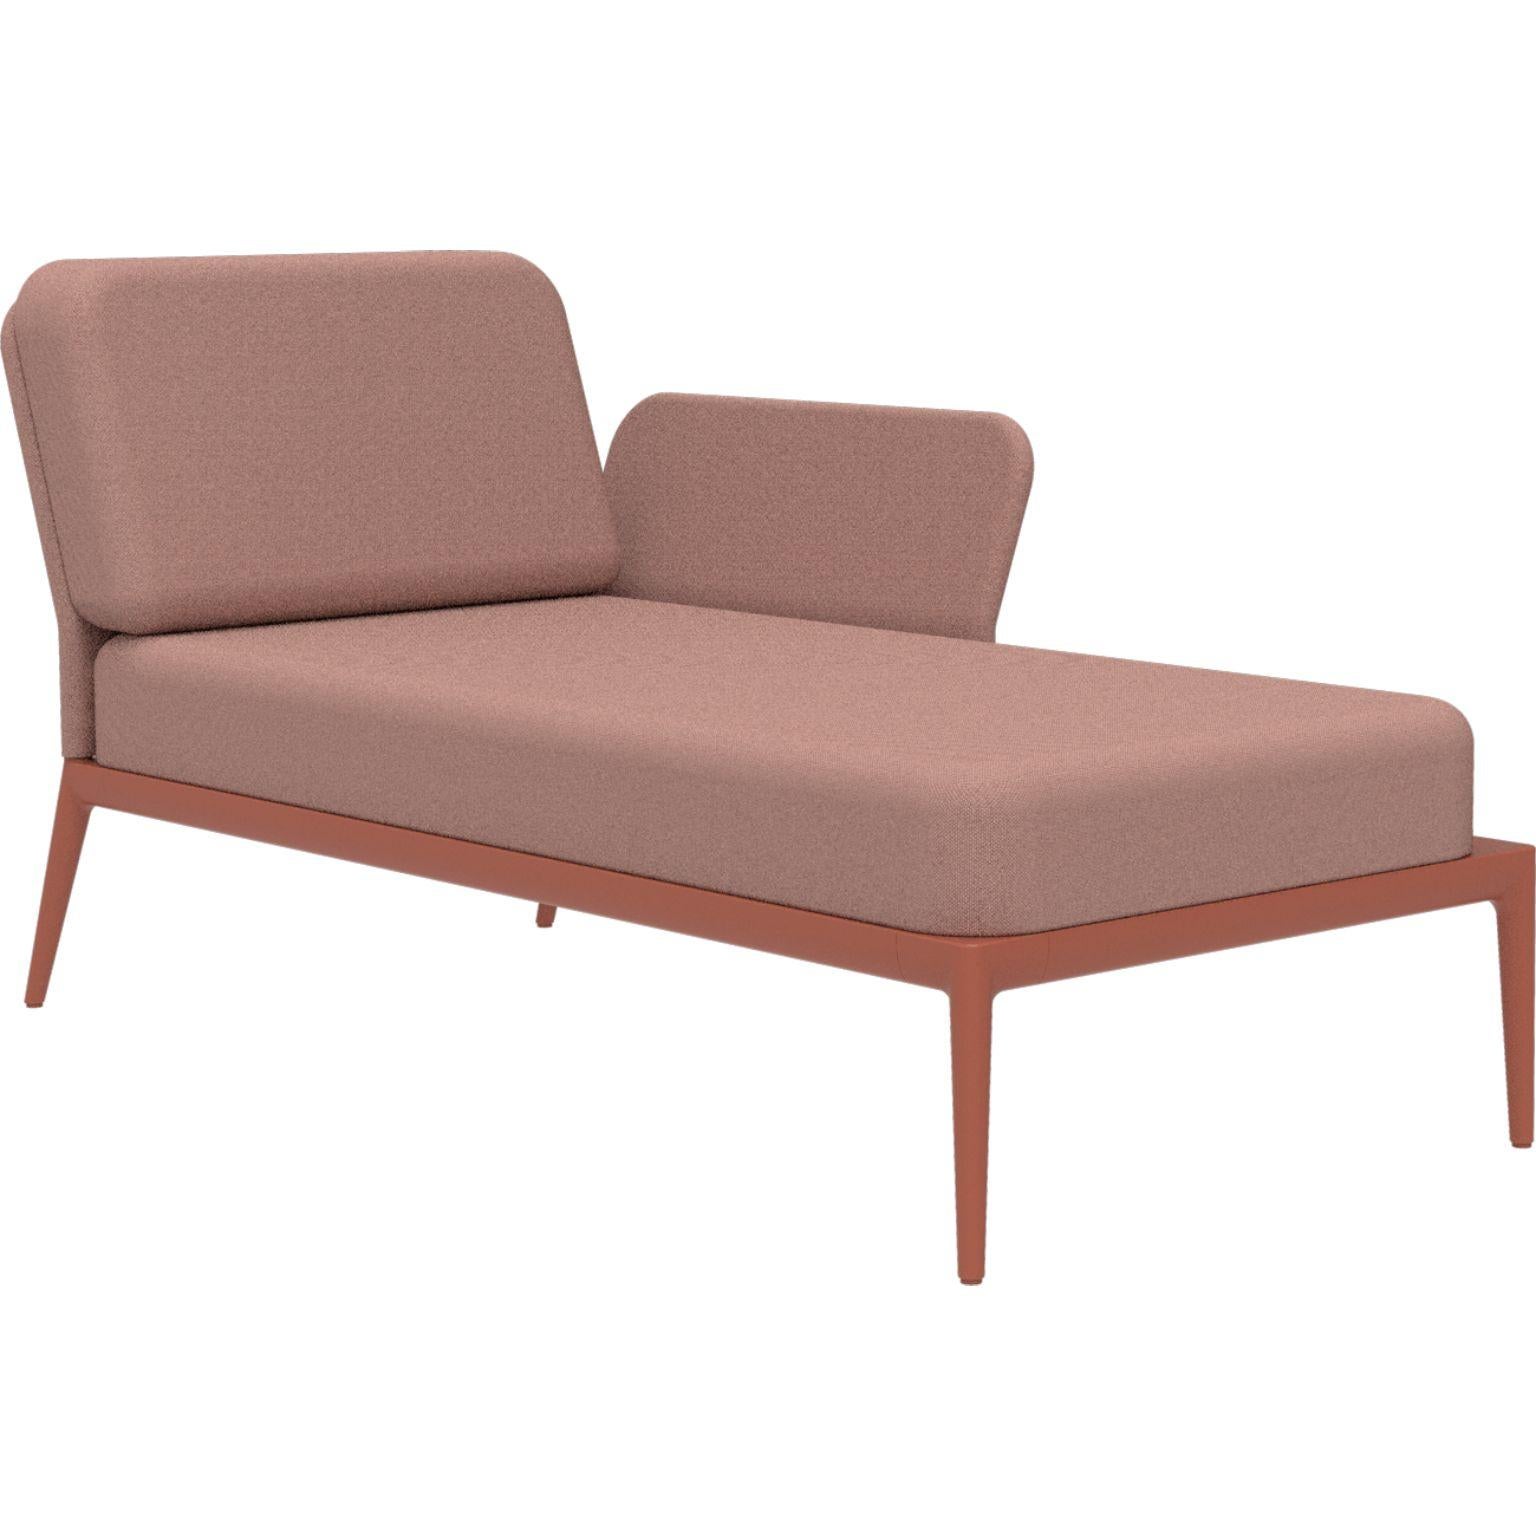 Cover Salmon Left Chaise Longue by MOWEE
Dimensions: D80 x W155 x H81 cm (seat height 42 cm).
Material: Aluminum and upholstery.
Weight: 28 kg.
Also available in different colors and finishes. Please contact us.

An unmistakable collection for